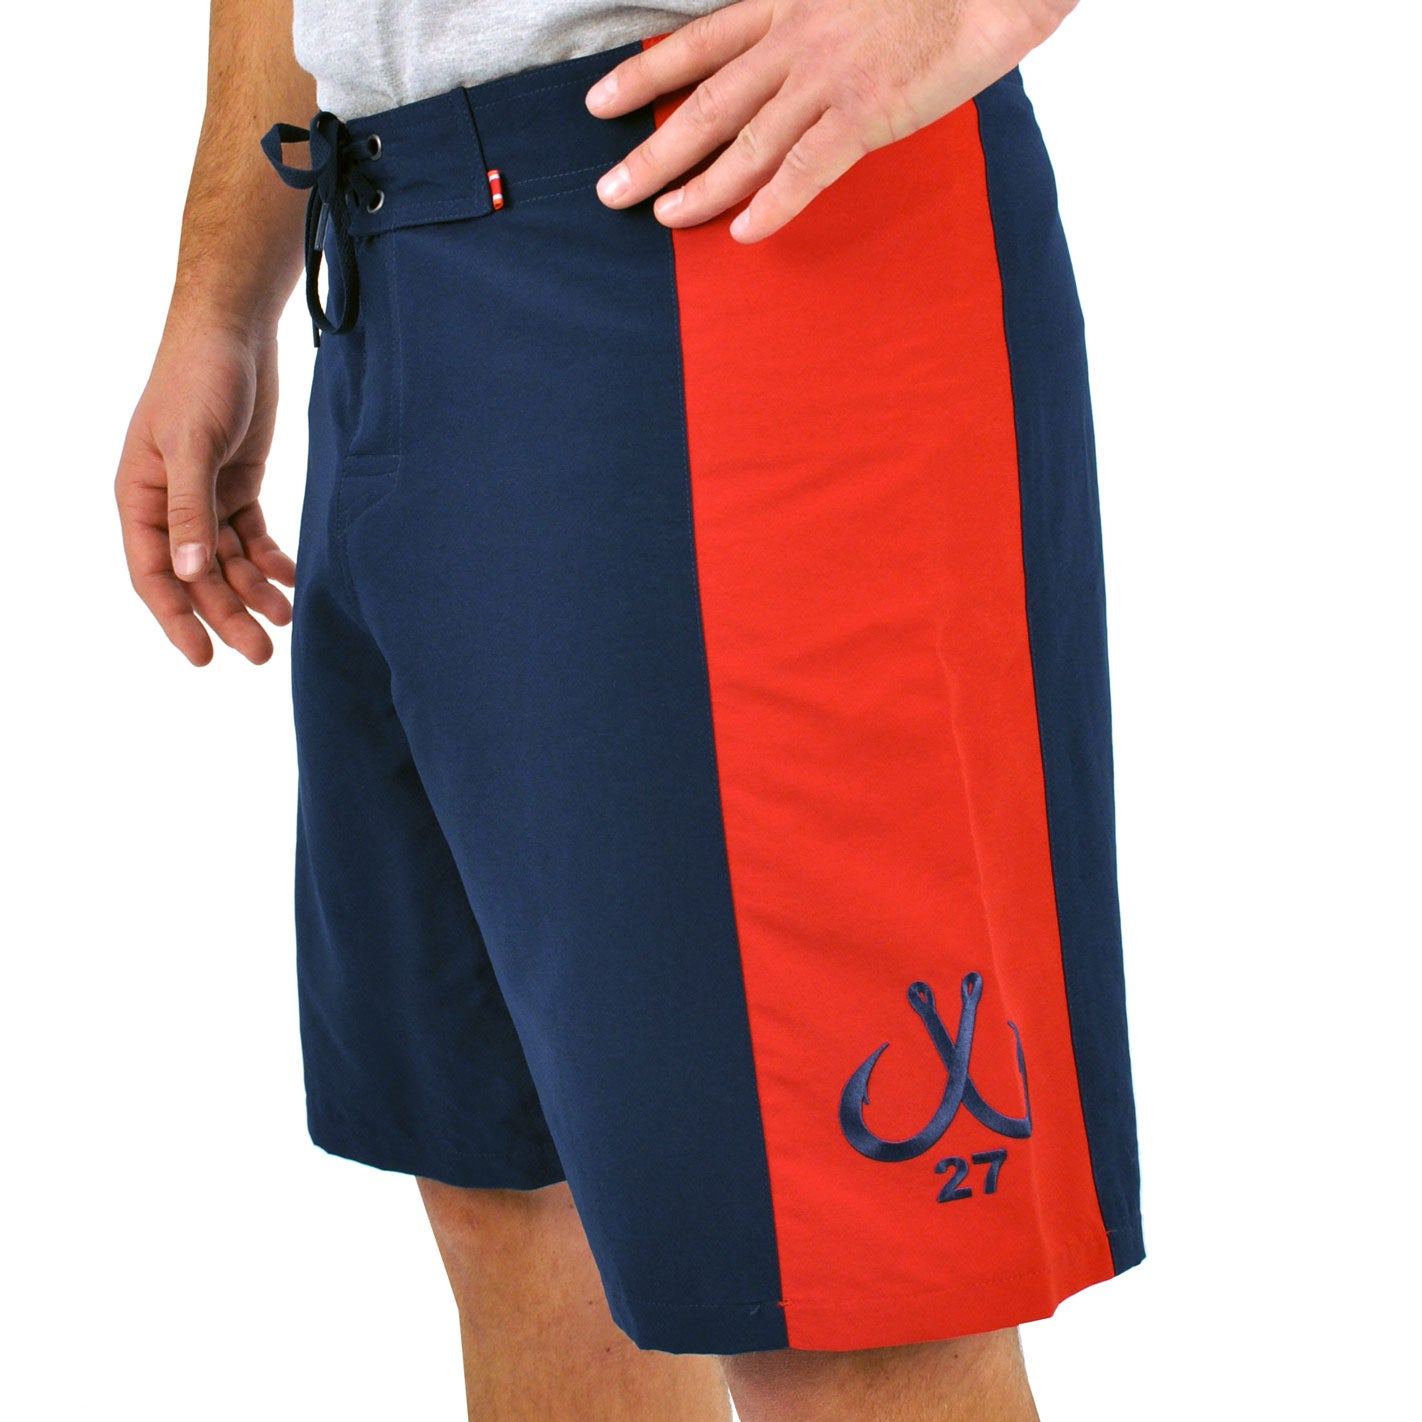 Board Shorts with Color Panel - Montauk Tackle Company